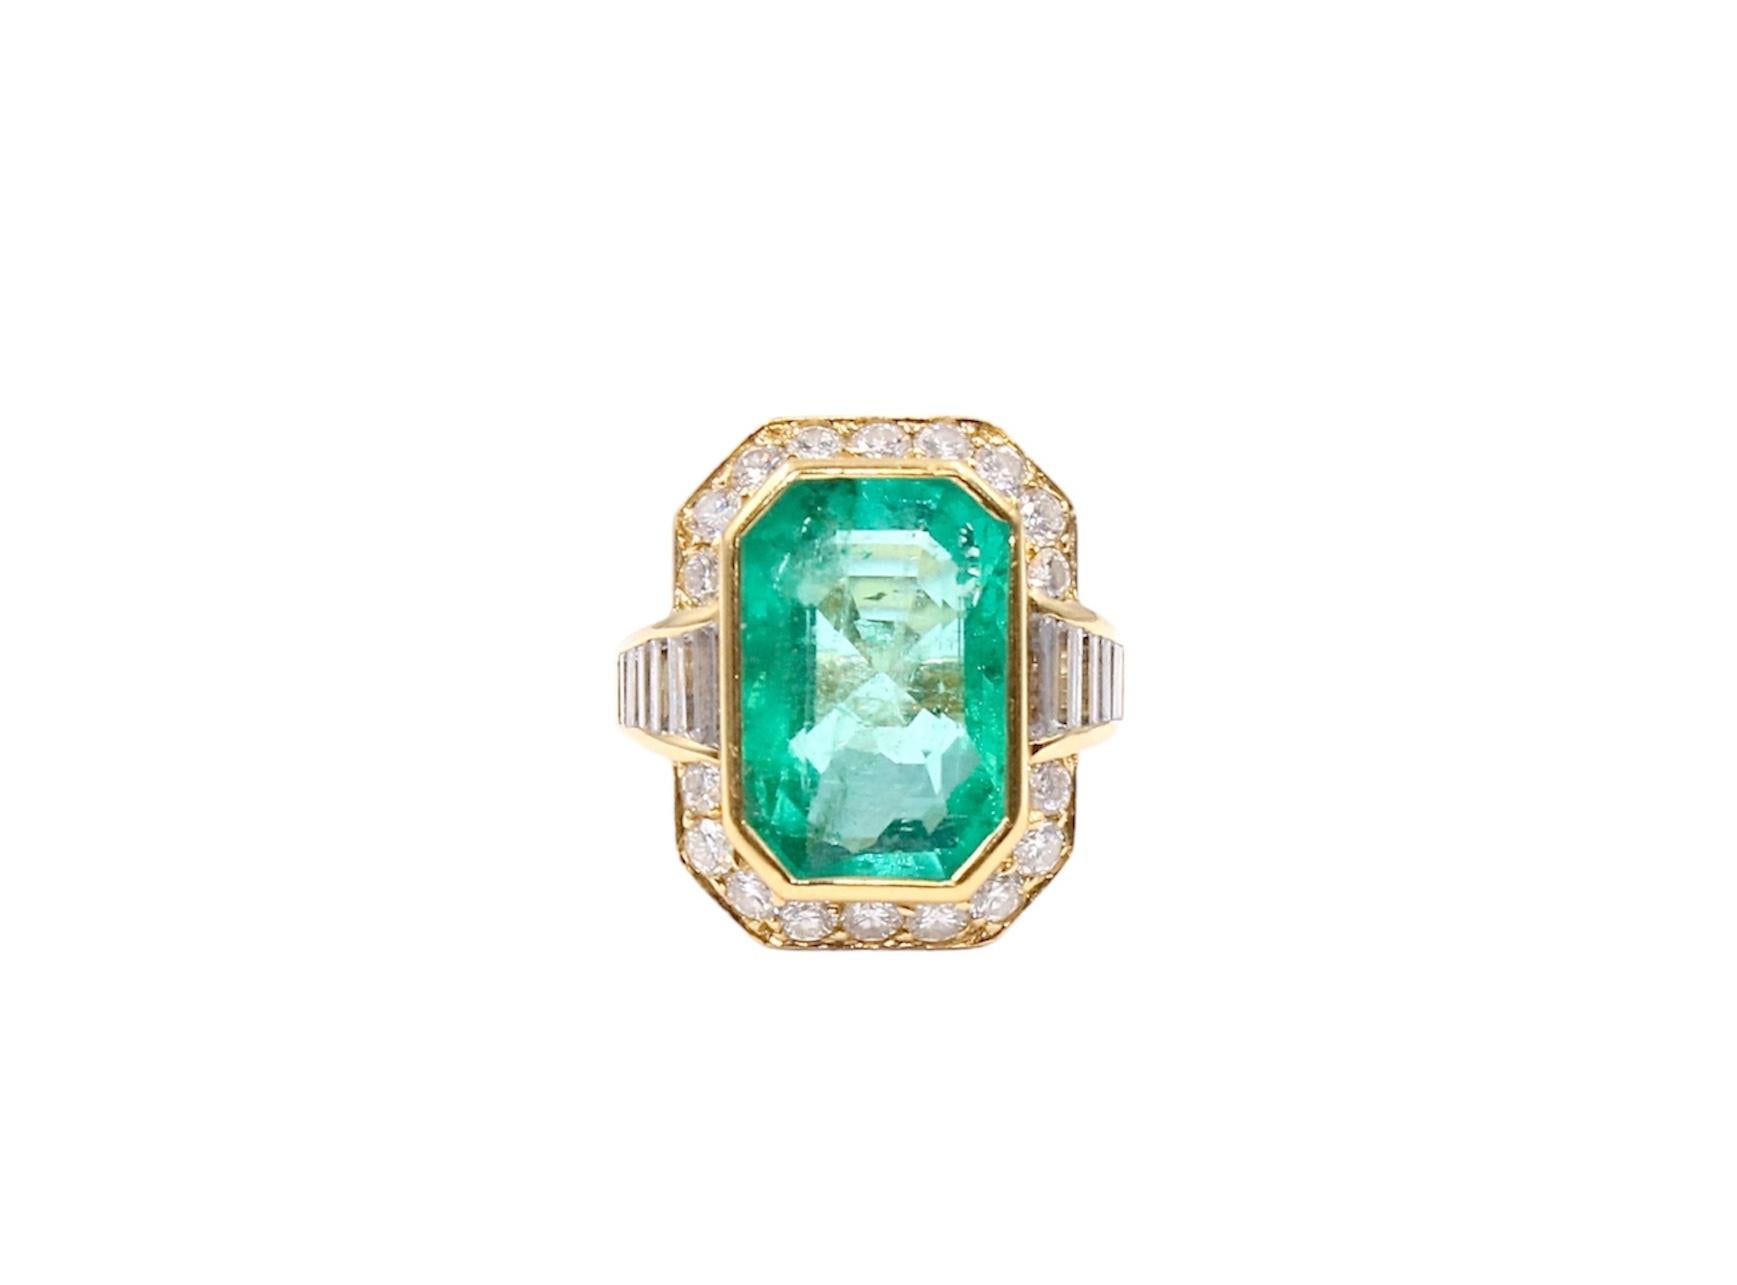 Emerald Cut Colombian Emerald 'Approximately 11.70 Carats' and Diamond Vintage Ring For Sale